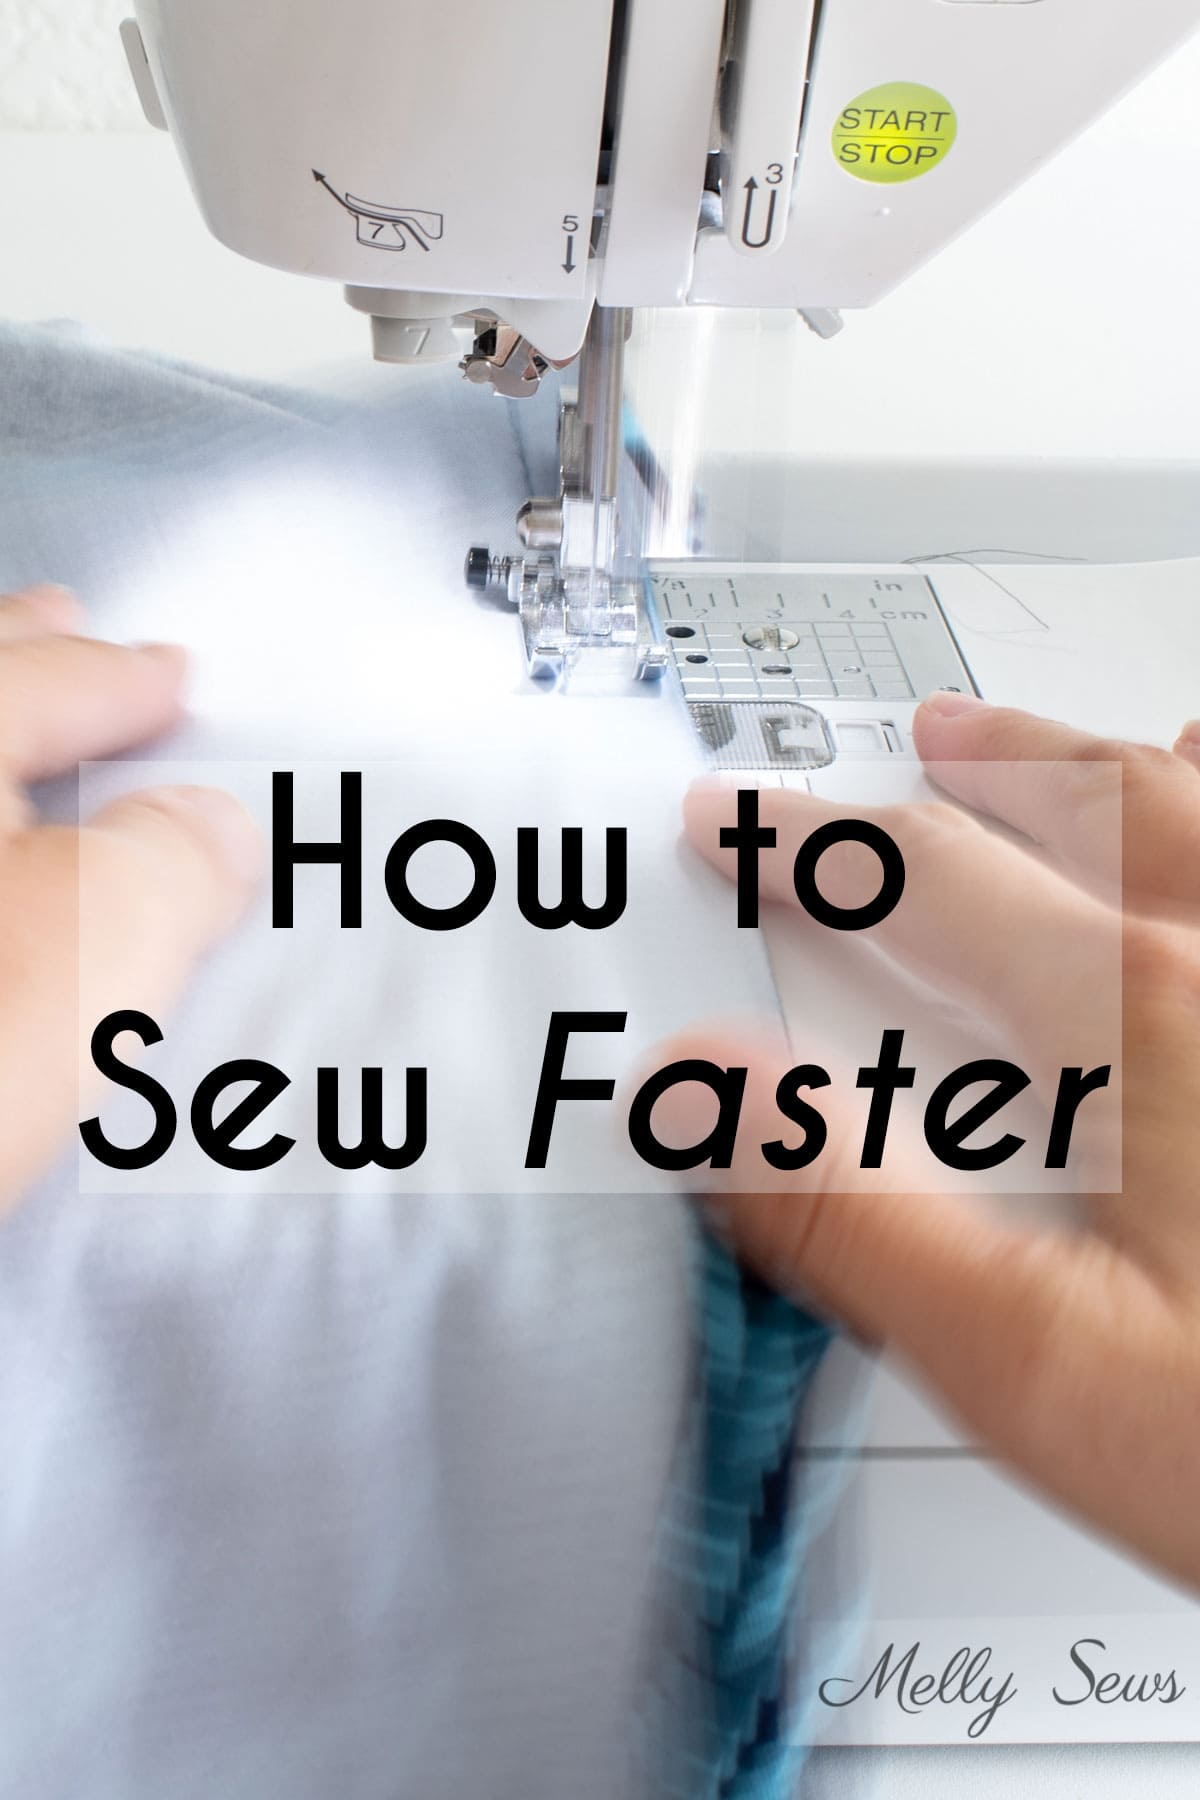 How to Sew Faster - 10 Tips for Faster Sewing - Melly Sews